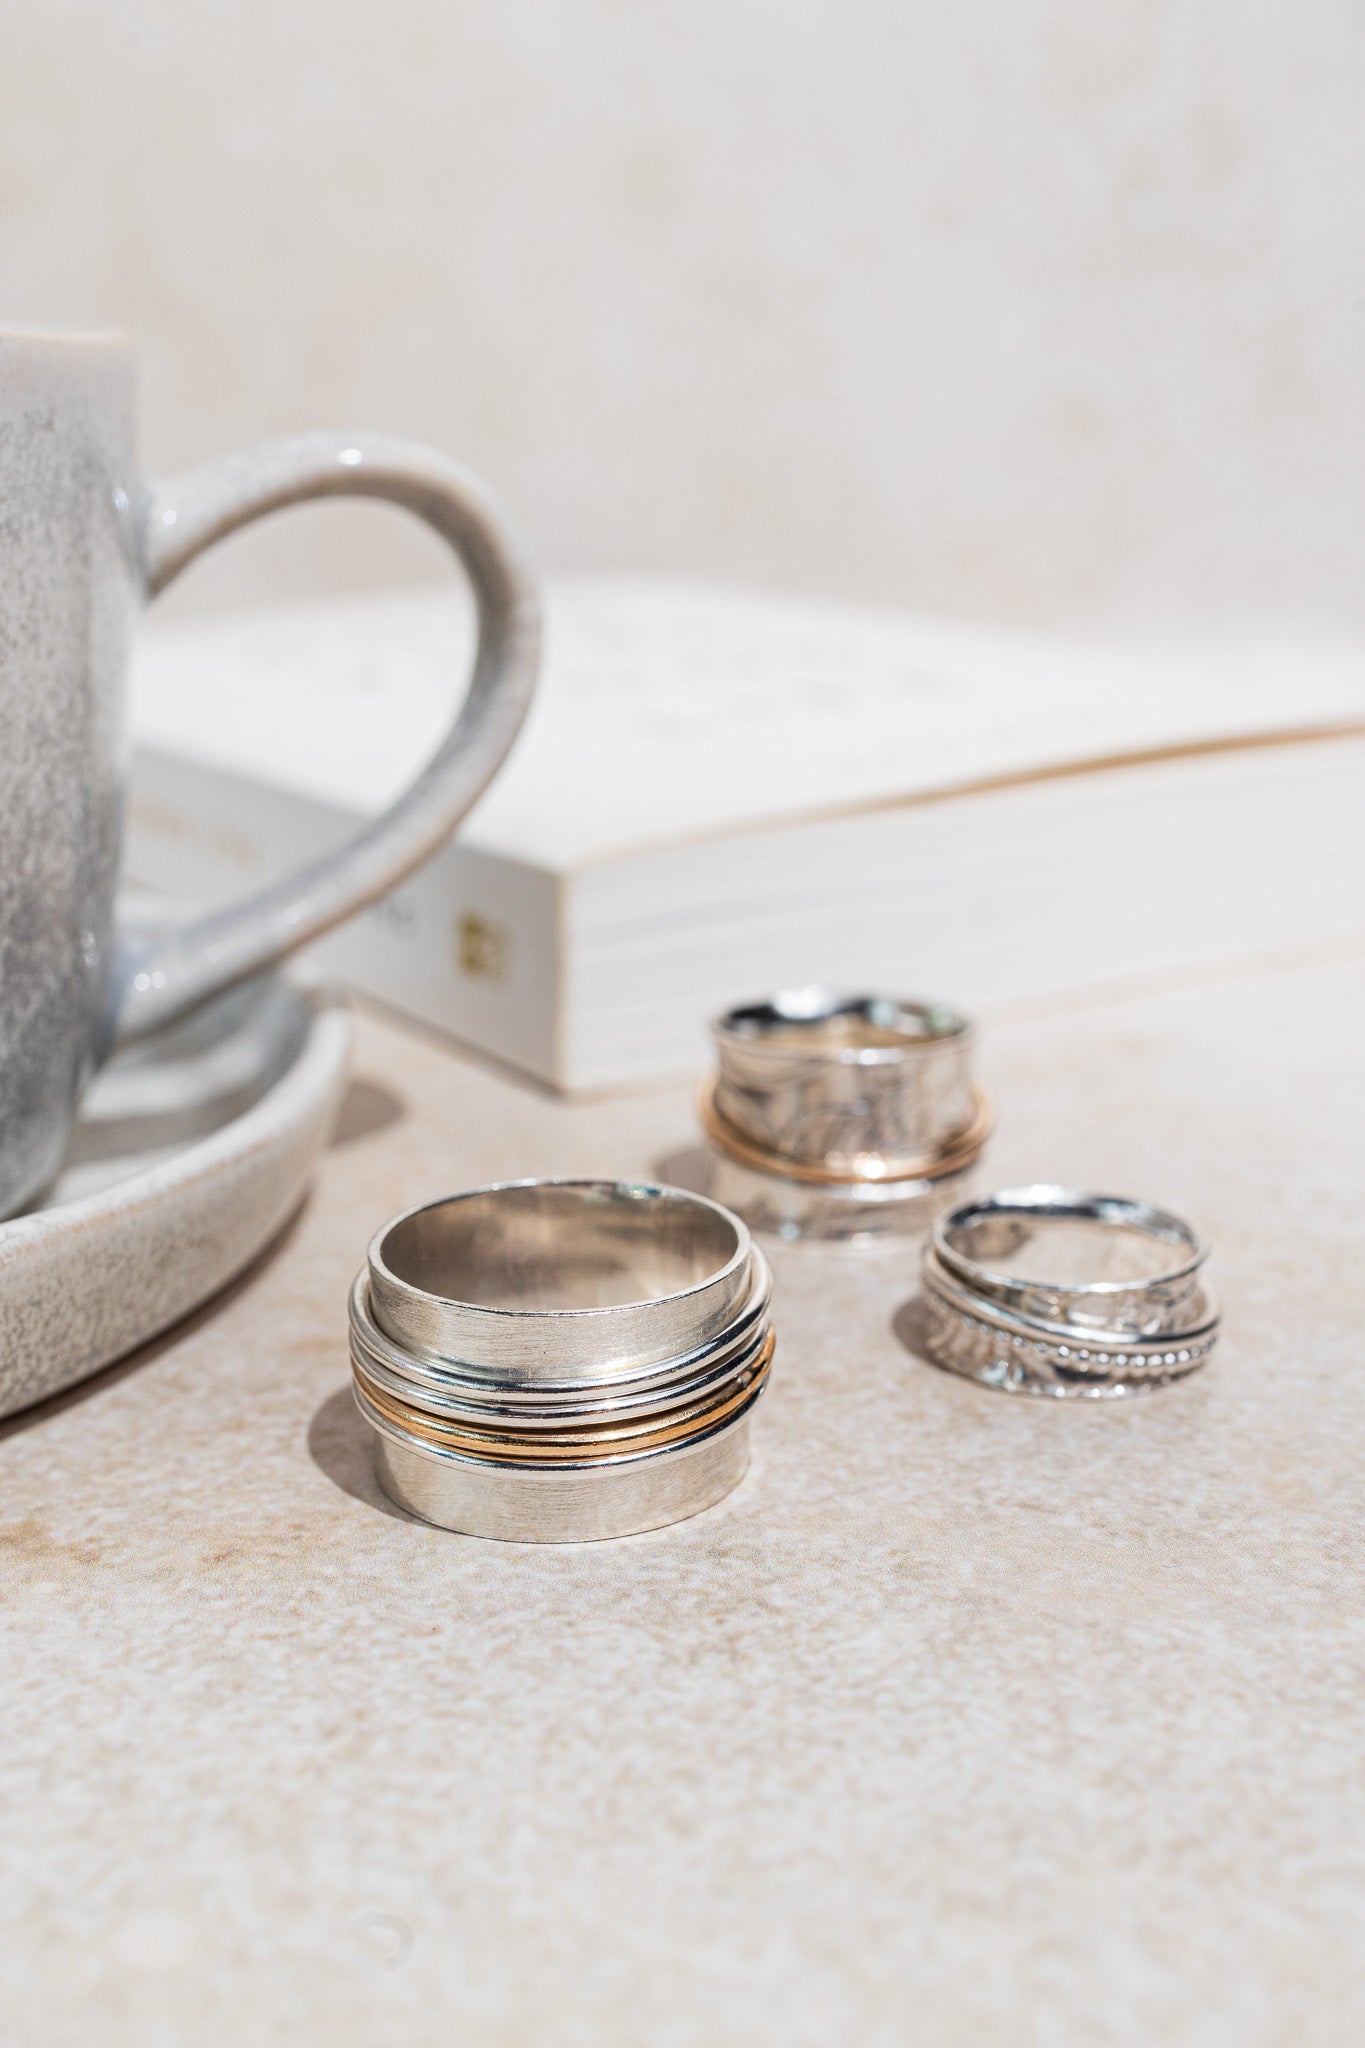 sterling silver spinner ring embedded lotus flower pattern finished beaded outer ring and gold filled outer ring pictured here with the book and mug